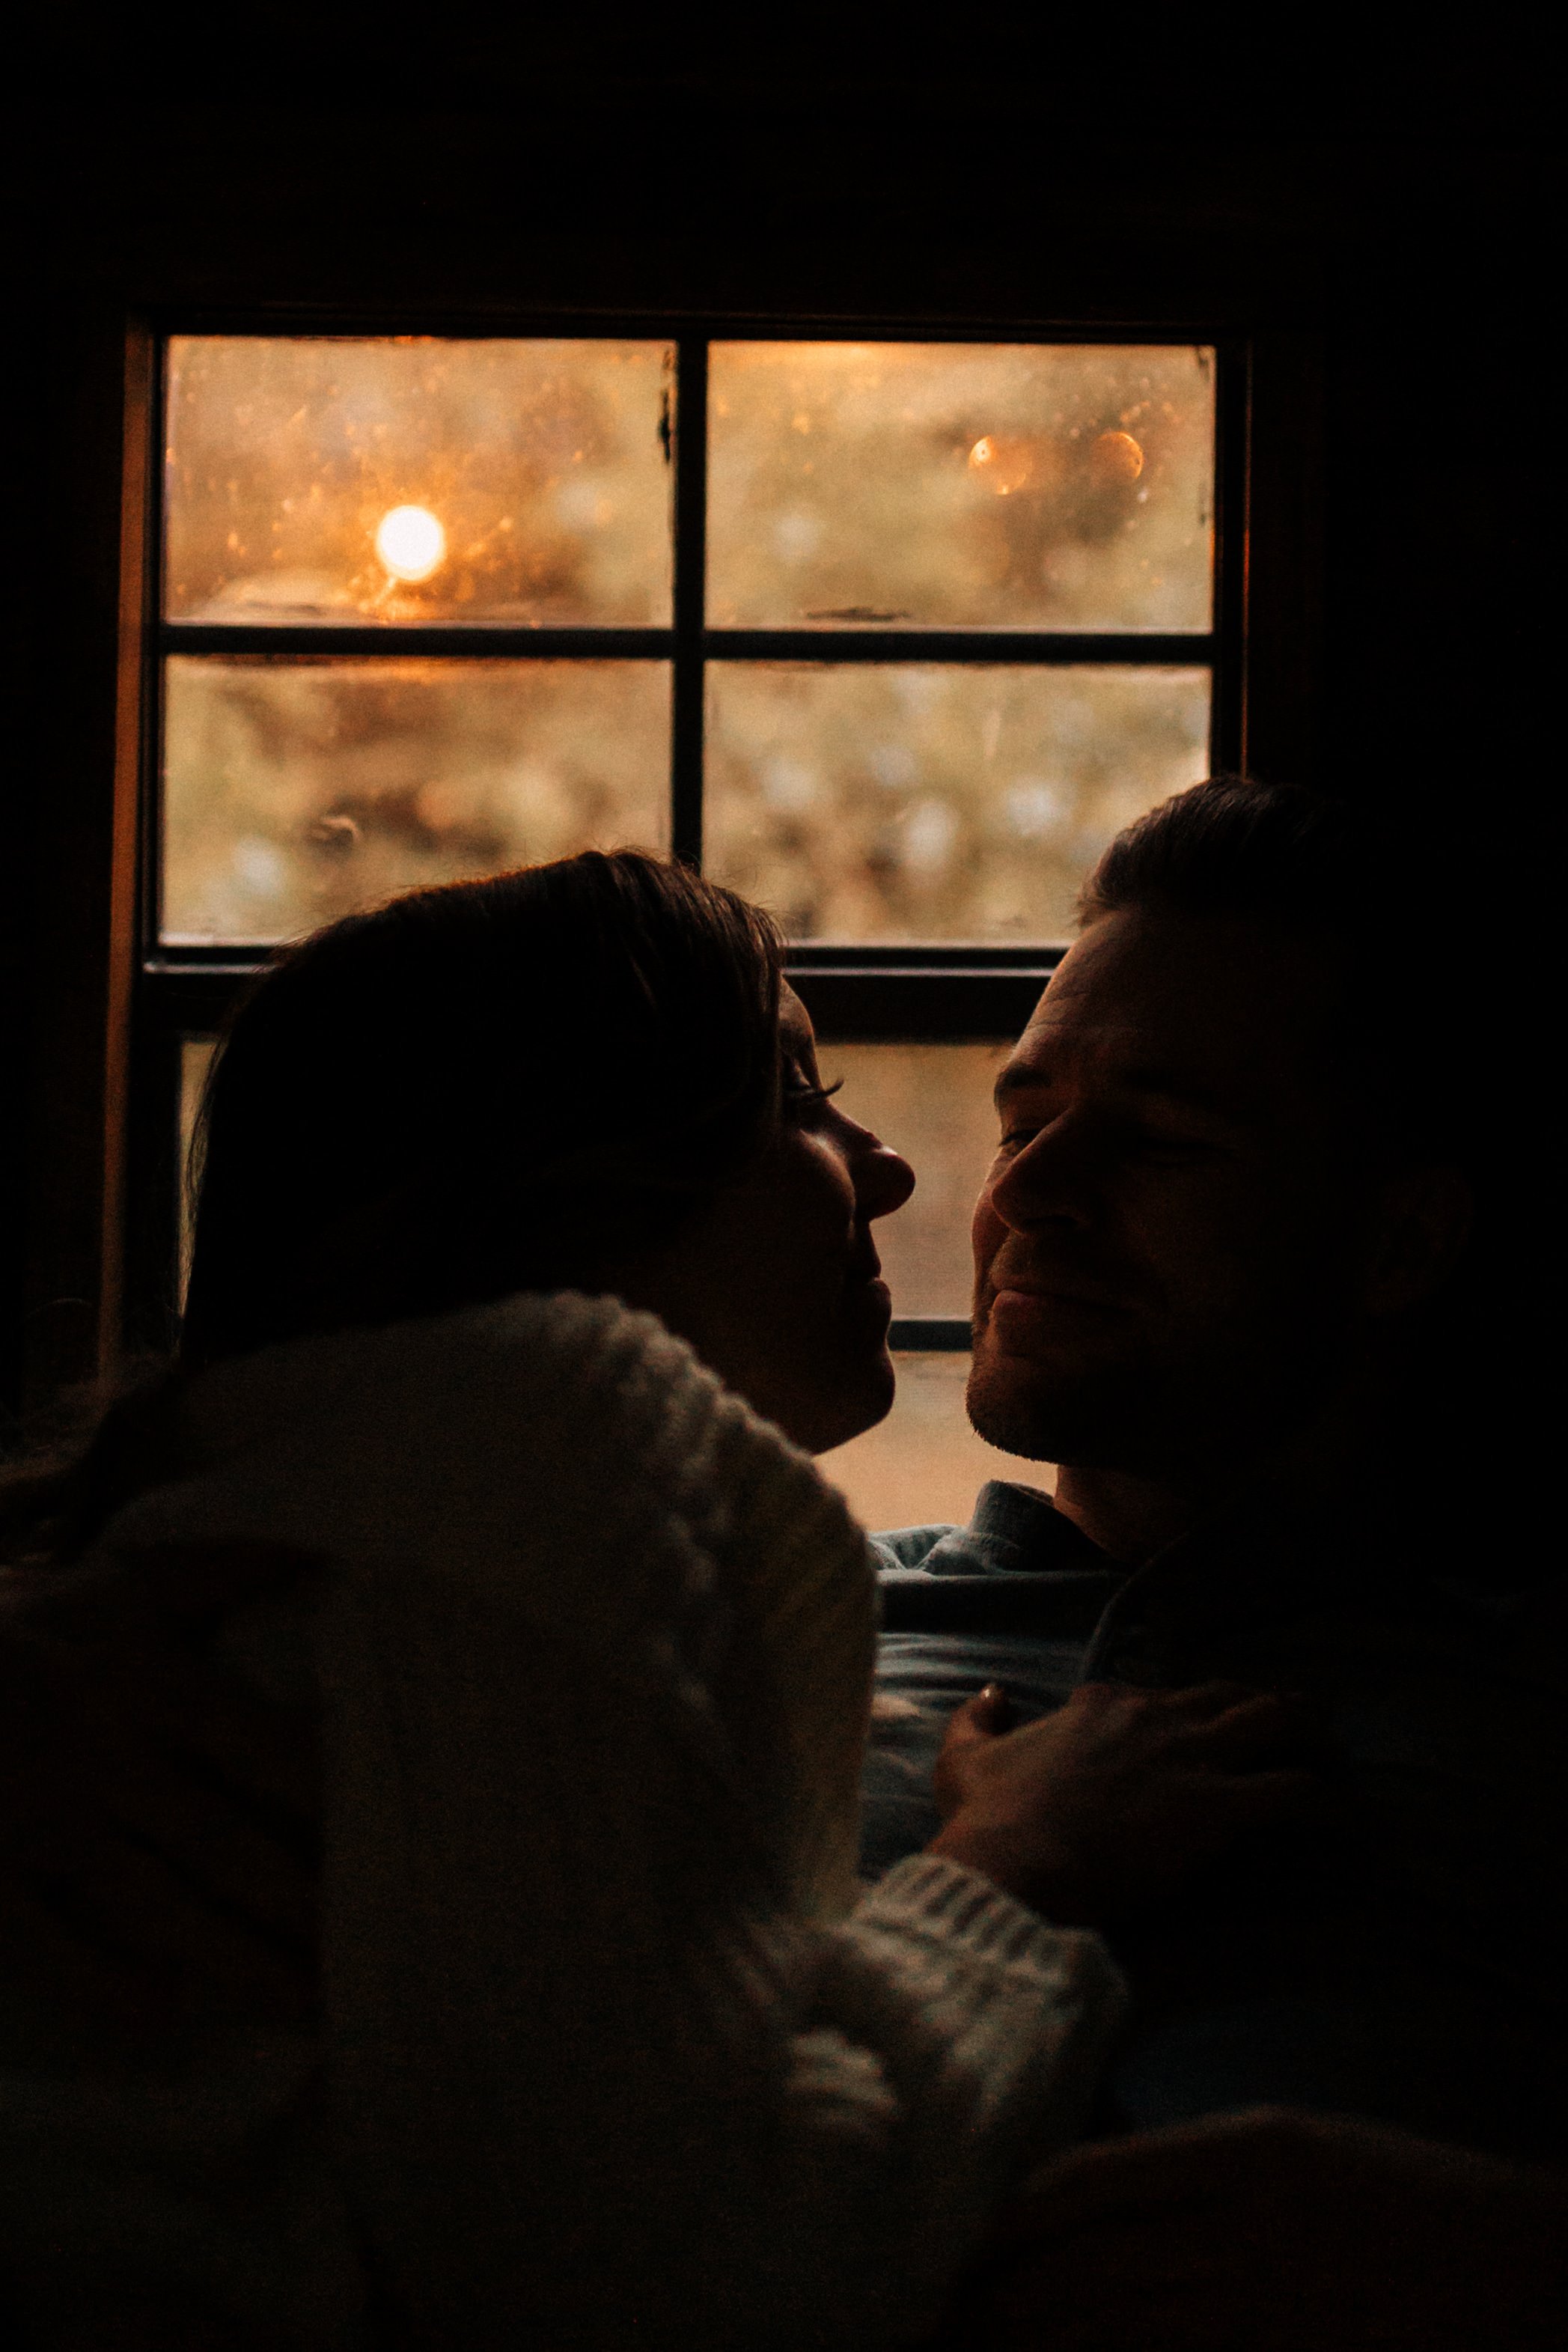 Laura_Ben_Engagment_Session_Winterset_Des_moines_Iowa_Couples_Photographer_Iris_Aisle_Cabin_Conservatory_Candid_Snow_Day_Winter_KMP_Photography-1478.jpg